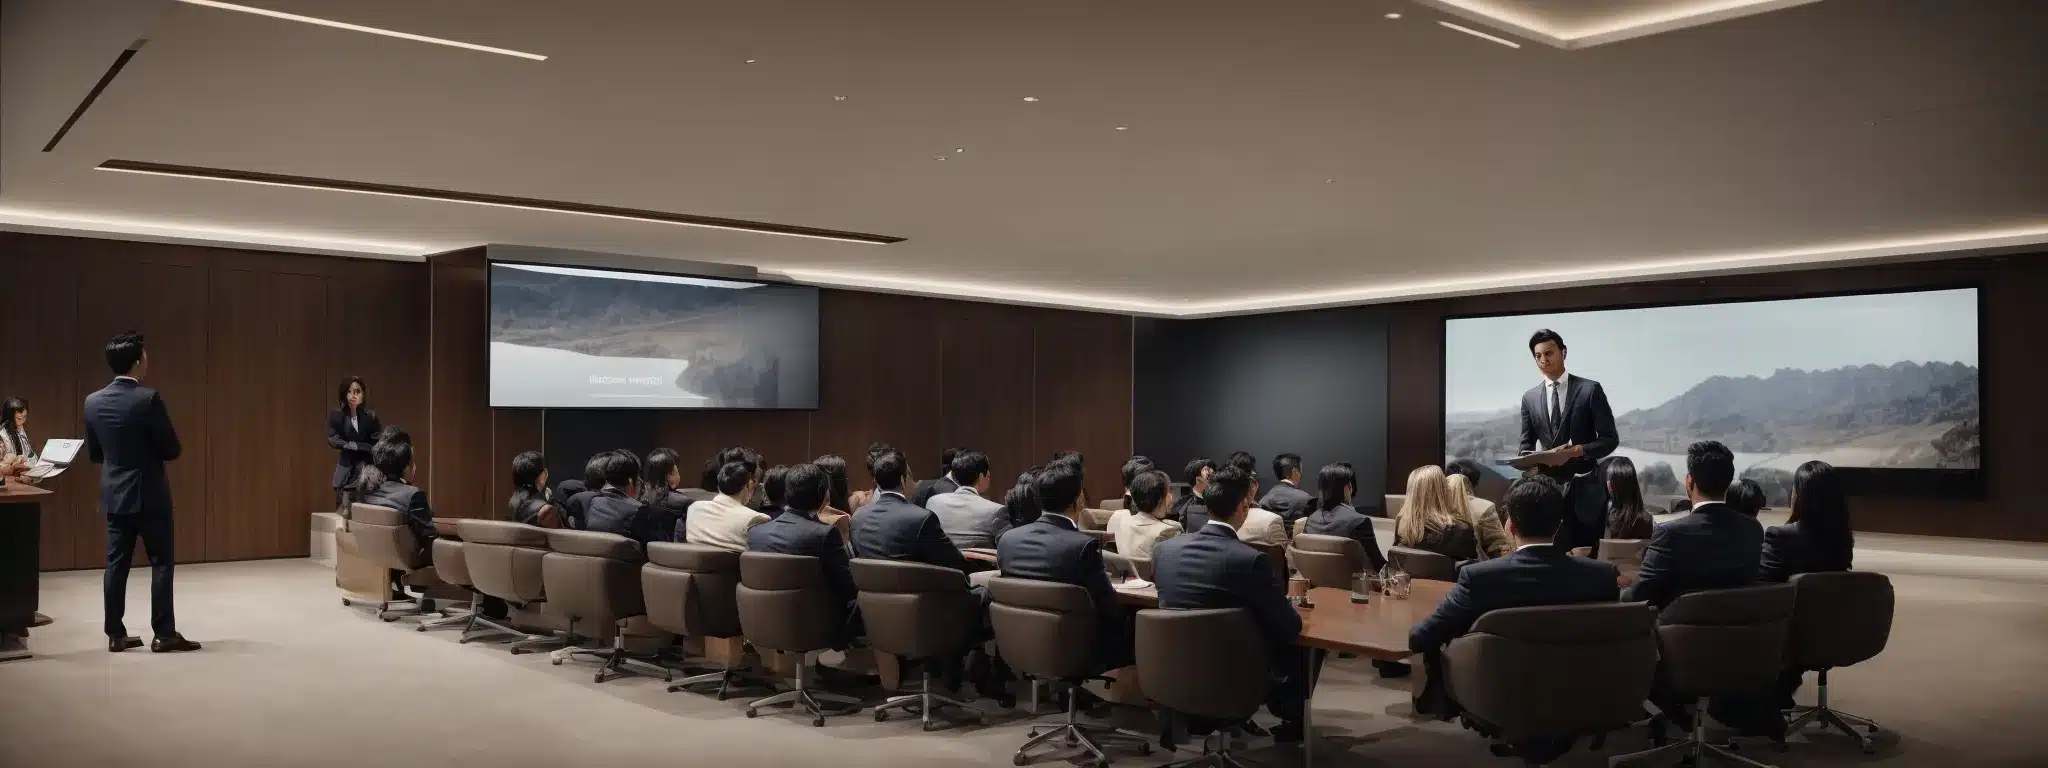 A Marketing Executive Presents A Polished Brand Portfolio To A Nodding Audience In A Sleek, Modern Conference Room.